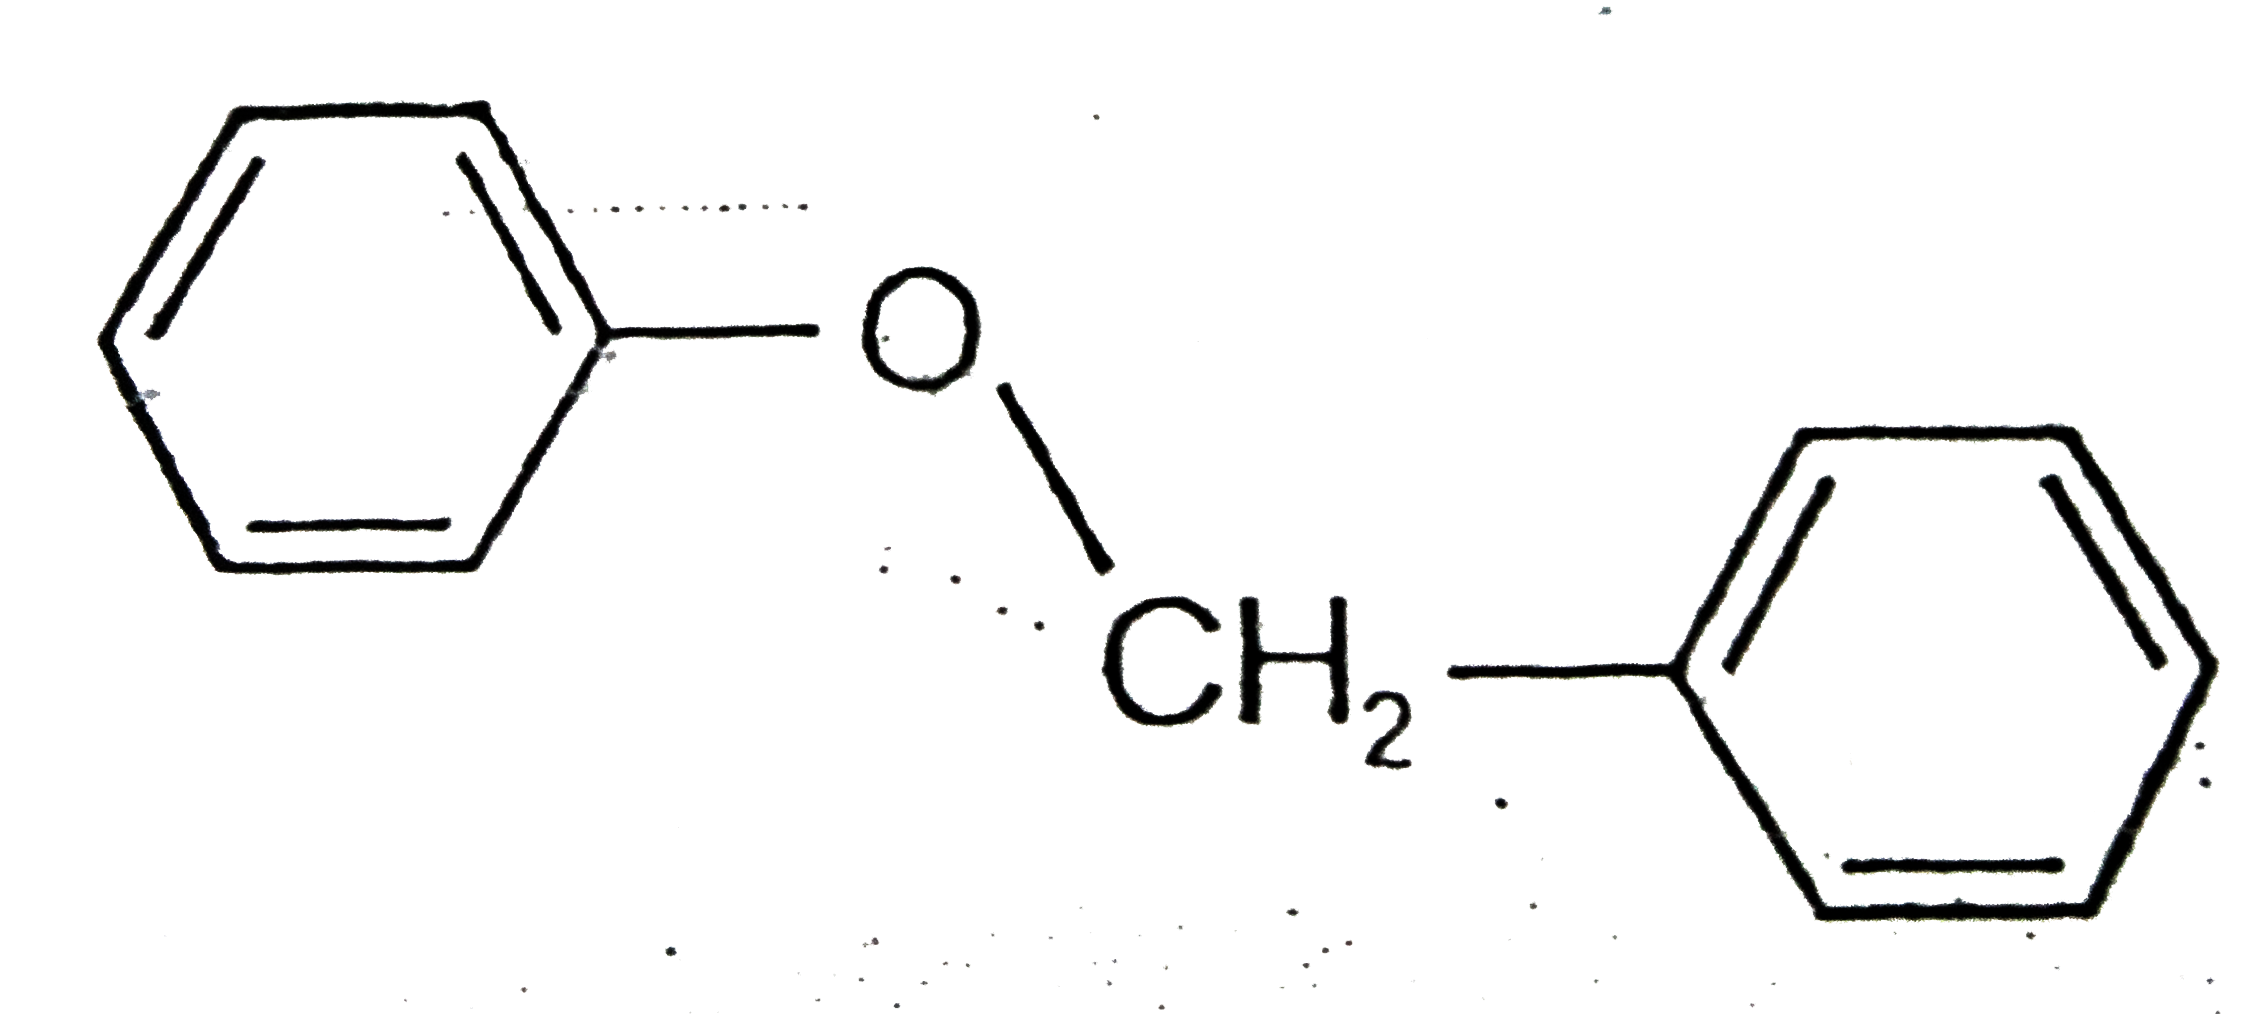 Prepare the   following  ethers  via the  williamson's  synthesis          CH(3)-overset(CH(3))overset(|)underset(CH(3))underset(|)(C )-O-CH(3)